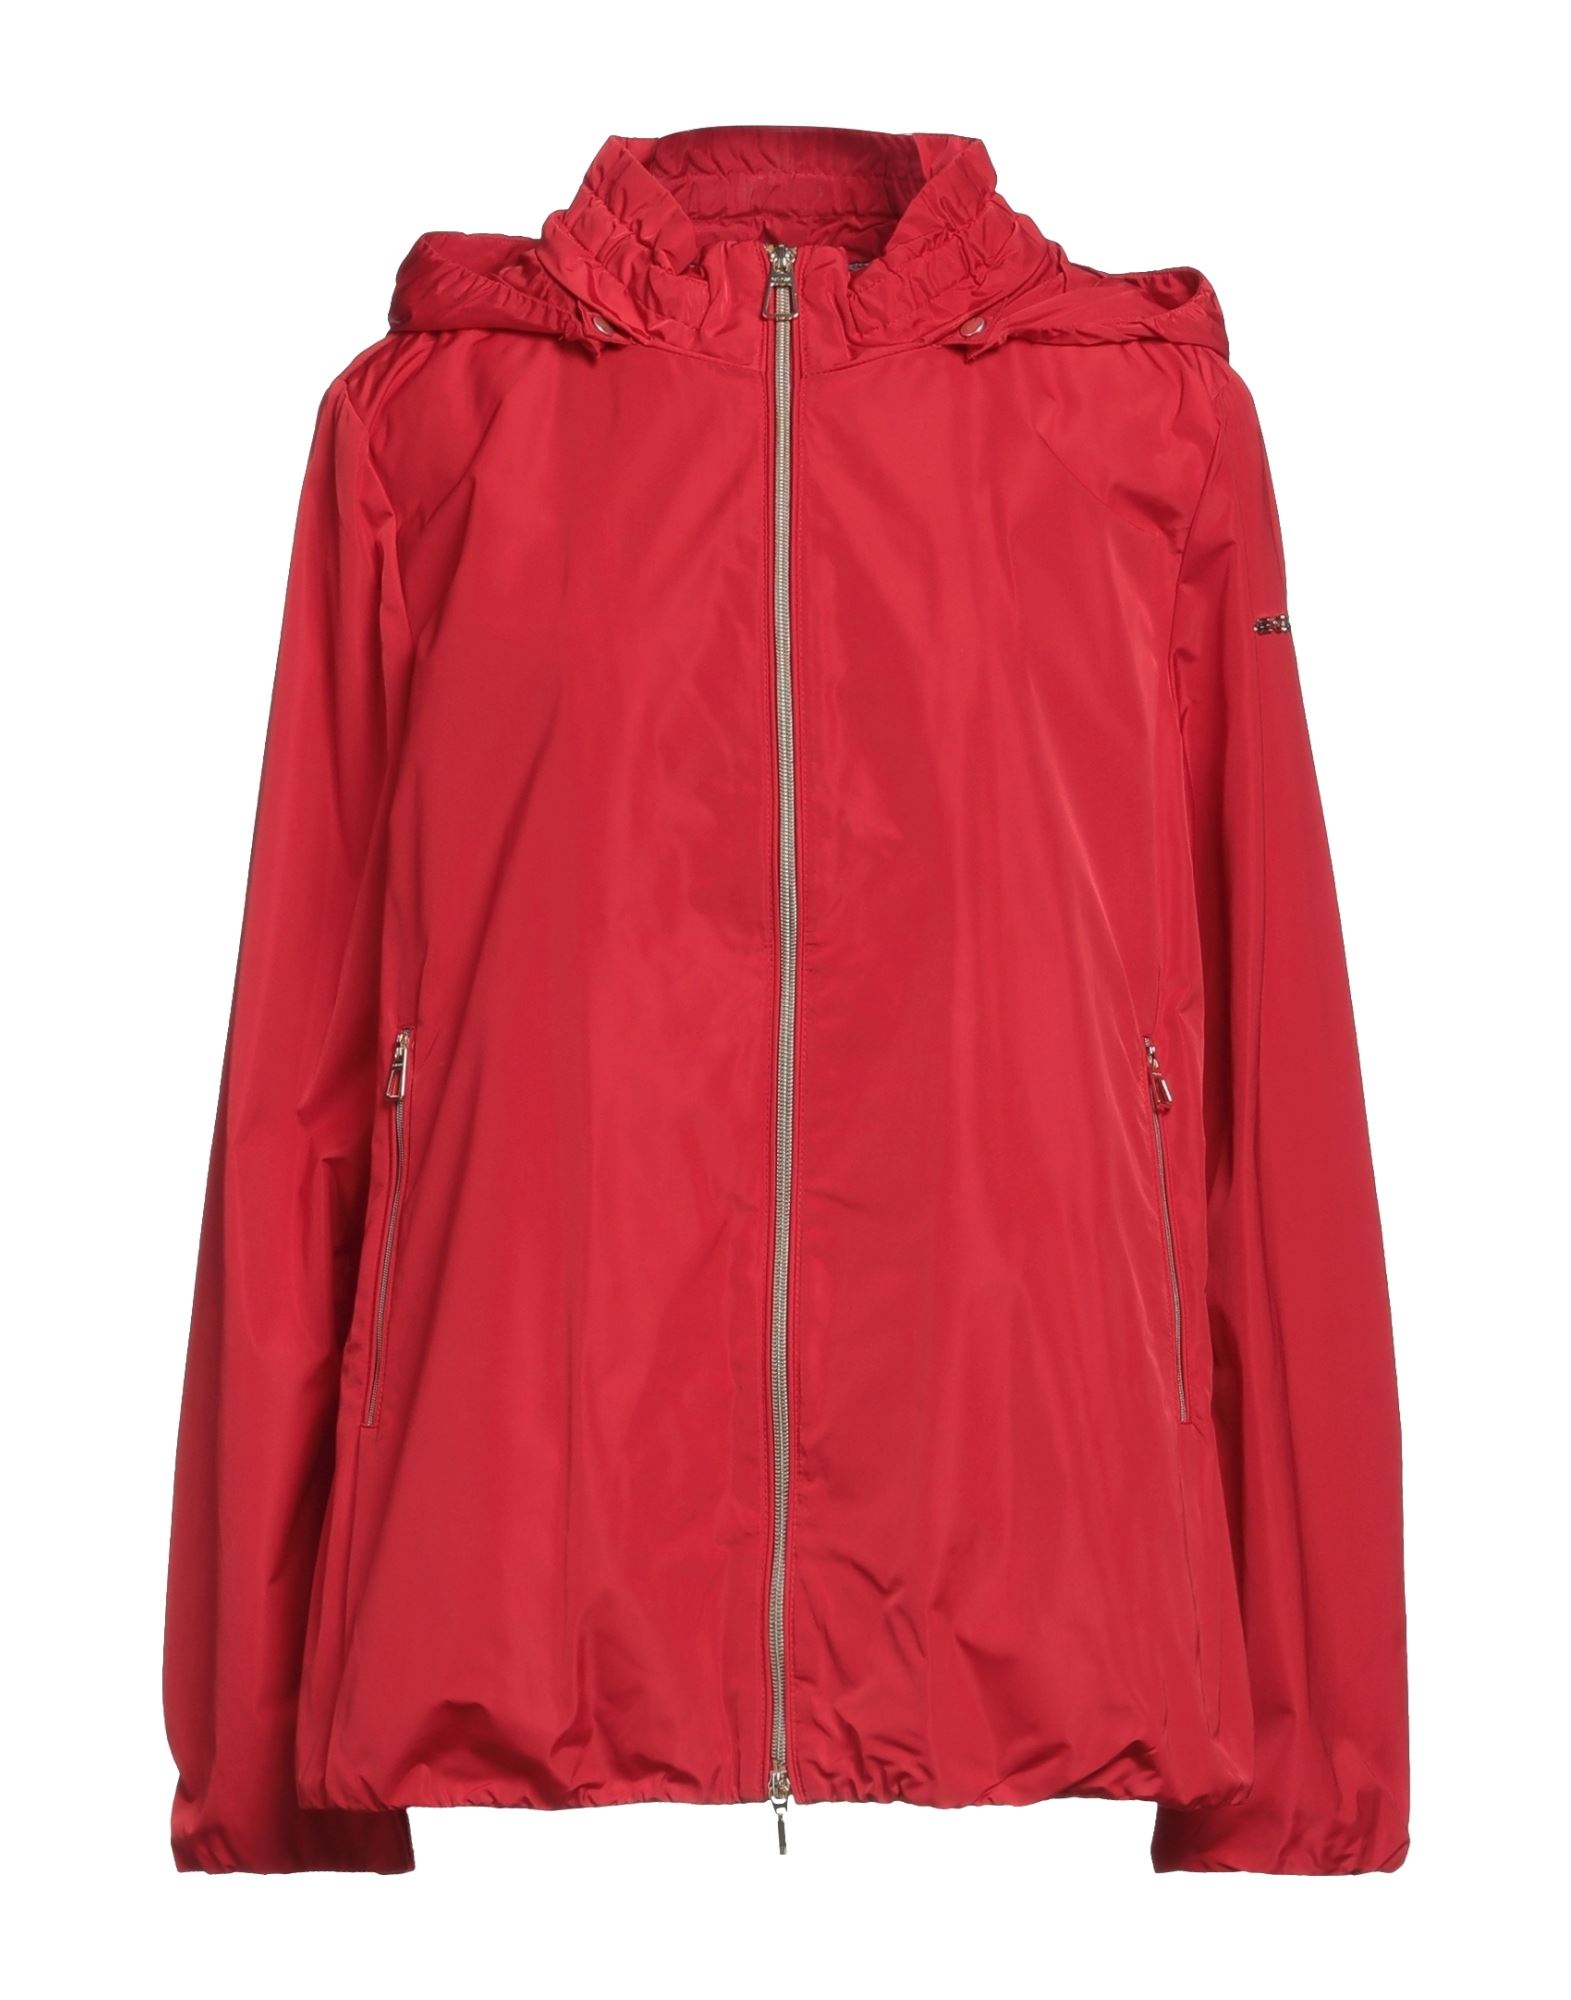 GEOX GEOX WOMAN JACKET RED SIZE 16 POLYESTER